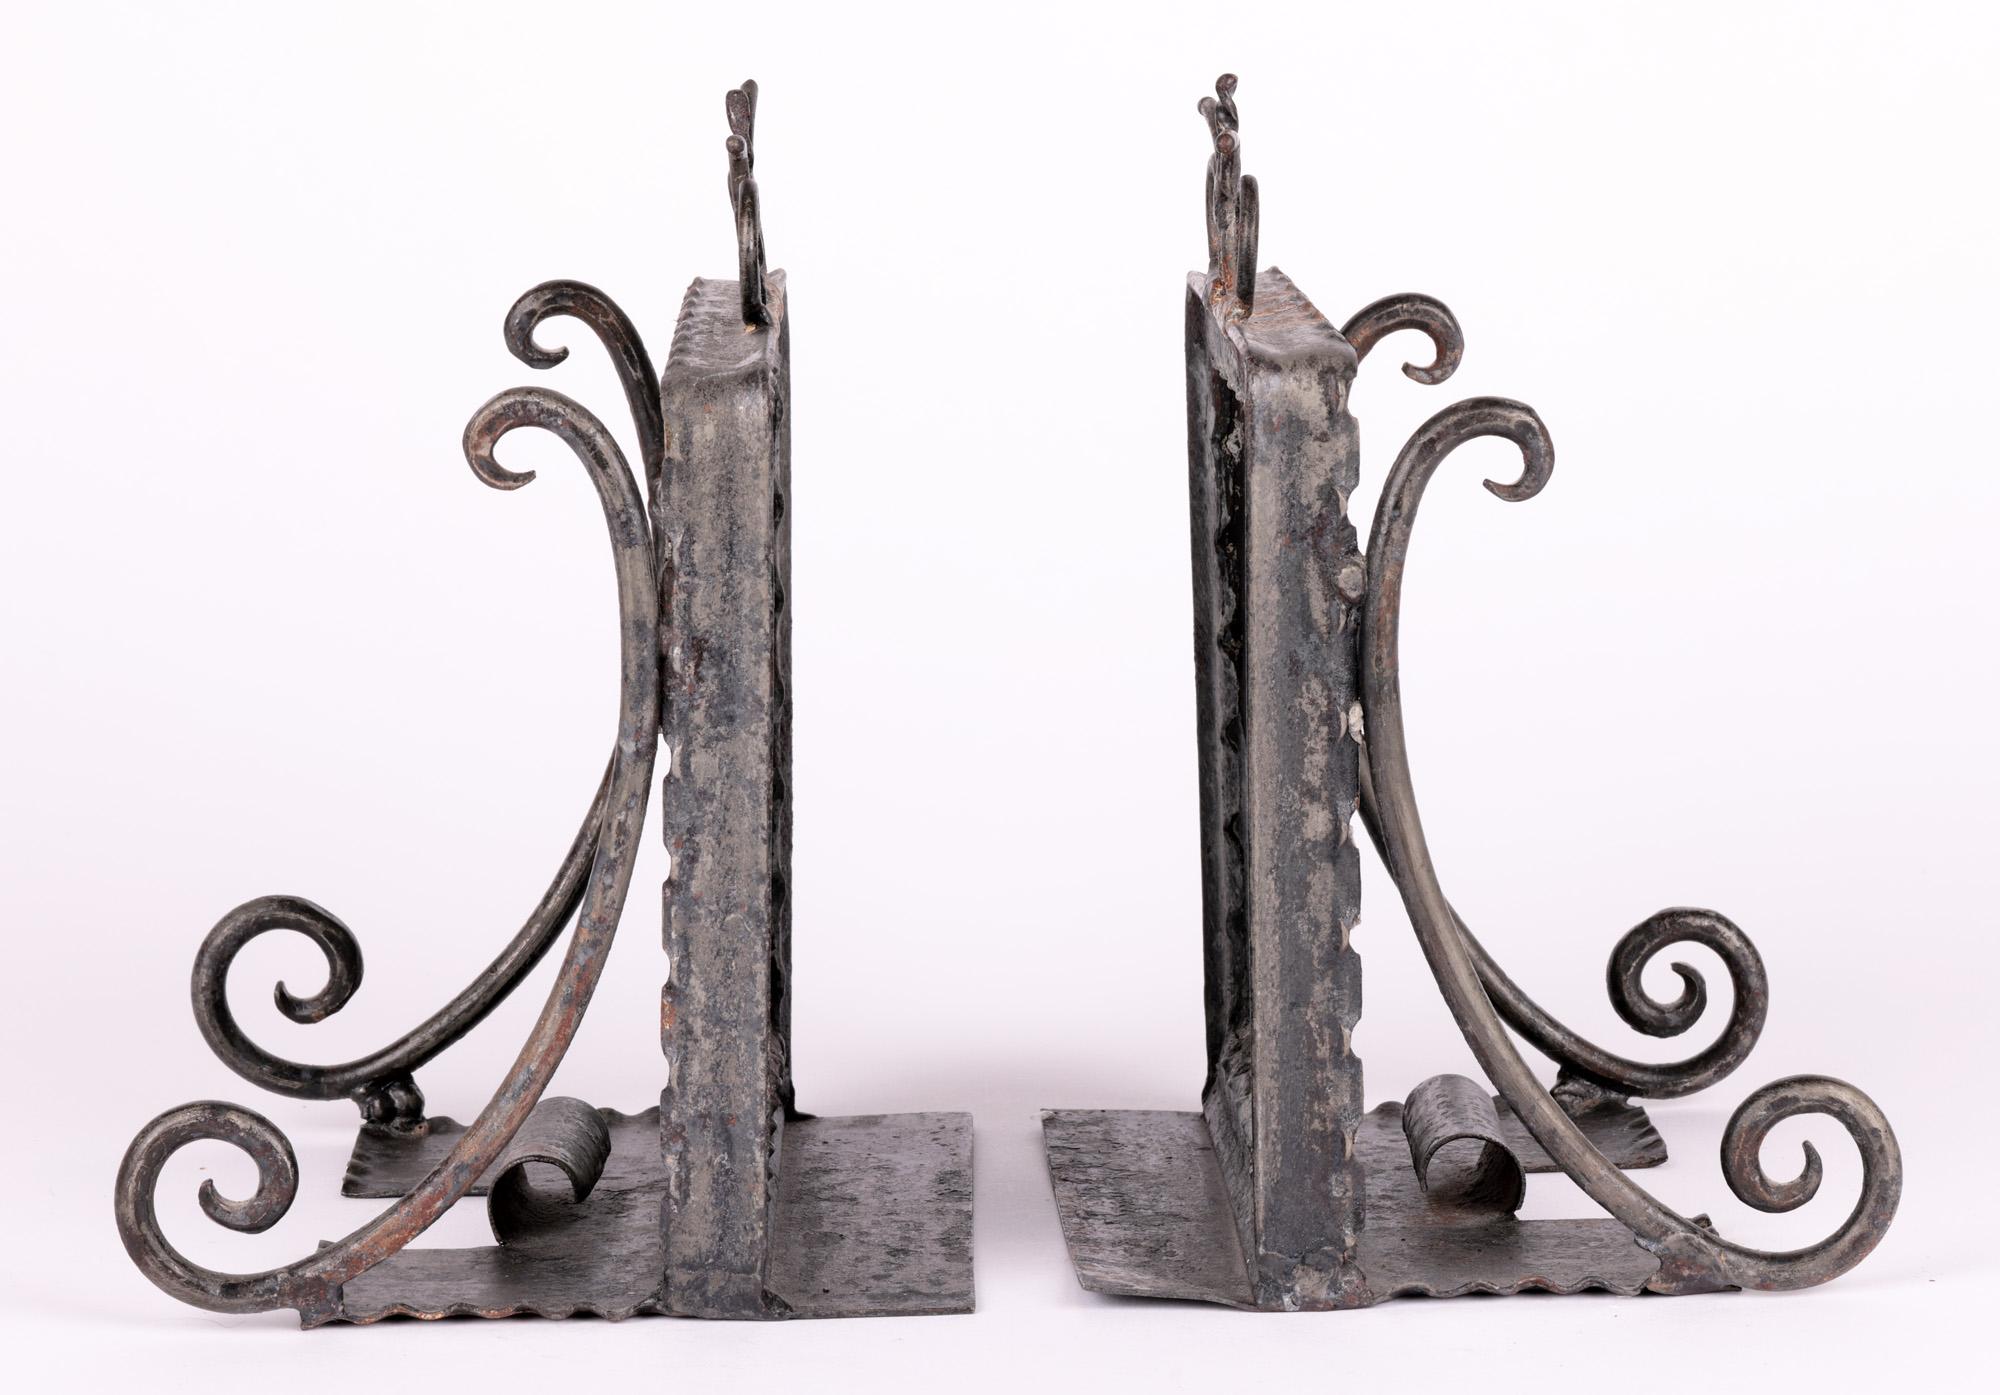 A very unusual pair Arts & Crafts hand-crafted metal framed bookends mounted with 18th century polychrome pottery tiles dating from the 19th century. The bookends are made in a folk art style with pewter coated metal frames with shaped flat bases